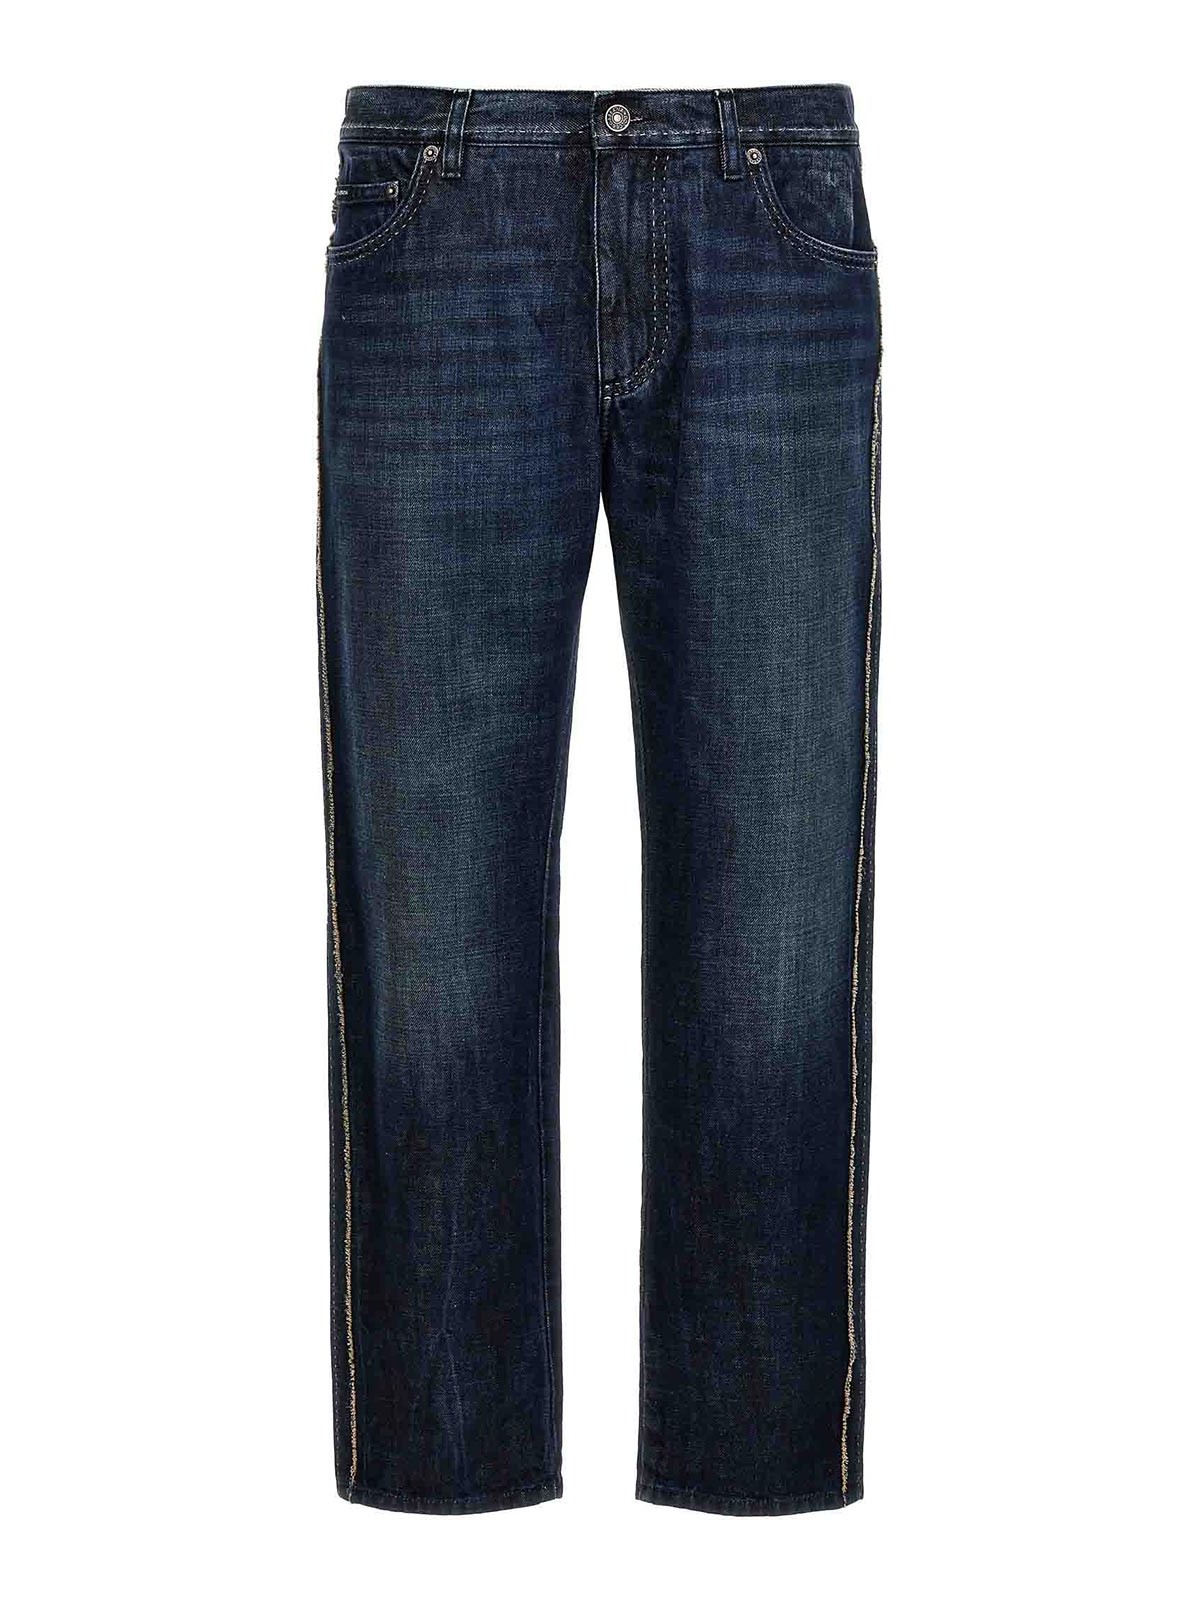 Dolce & Gabbana Fringed Stitching Jeans In Azul